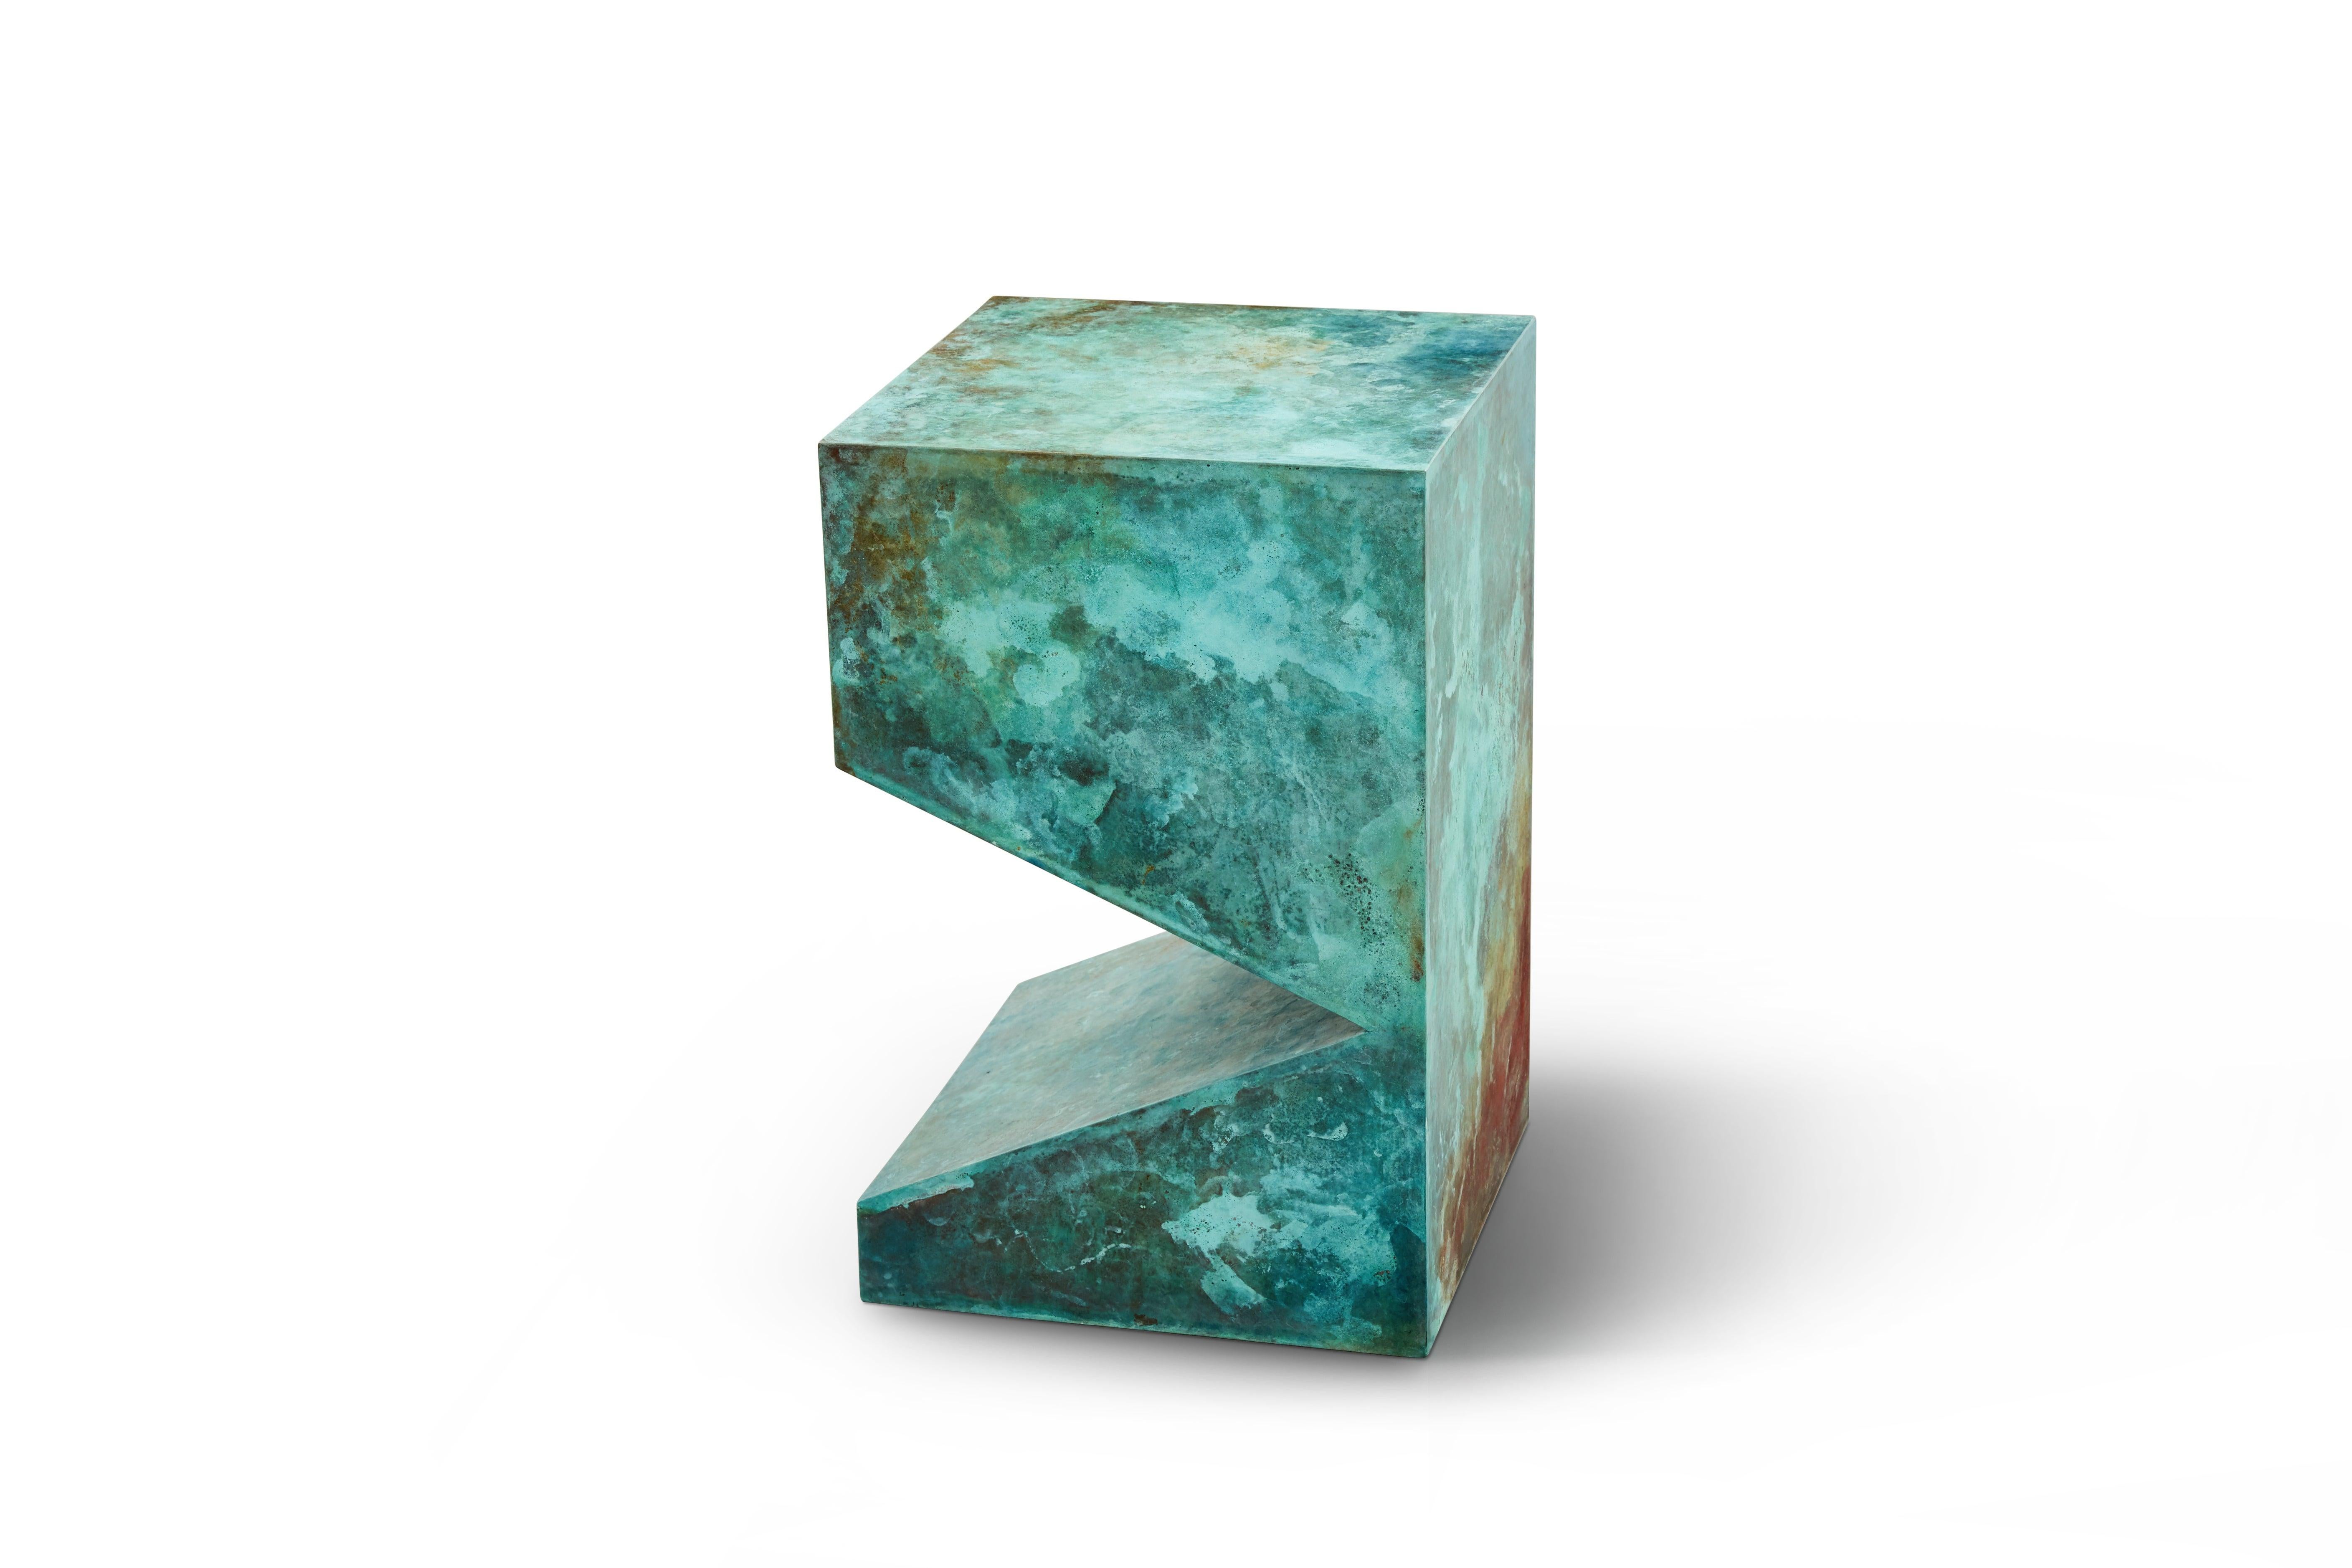 The colorful stool/side table is designed and made by artist Daishi Luo (Shanghai, China). It is fully customizable in size and color. 

Spontaneous growth of copper is the latest series in Daishi's Bio-design programs. She uses a comprehensive